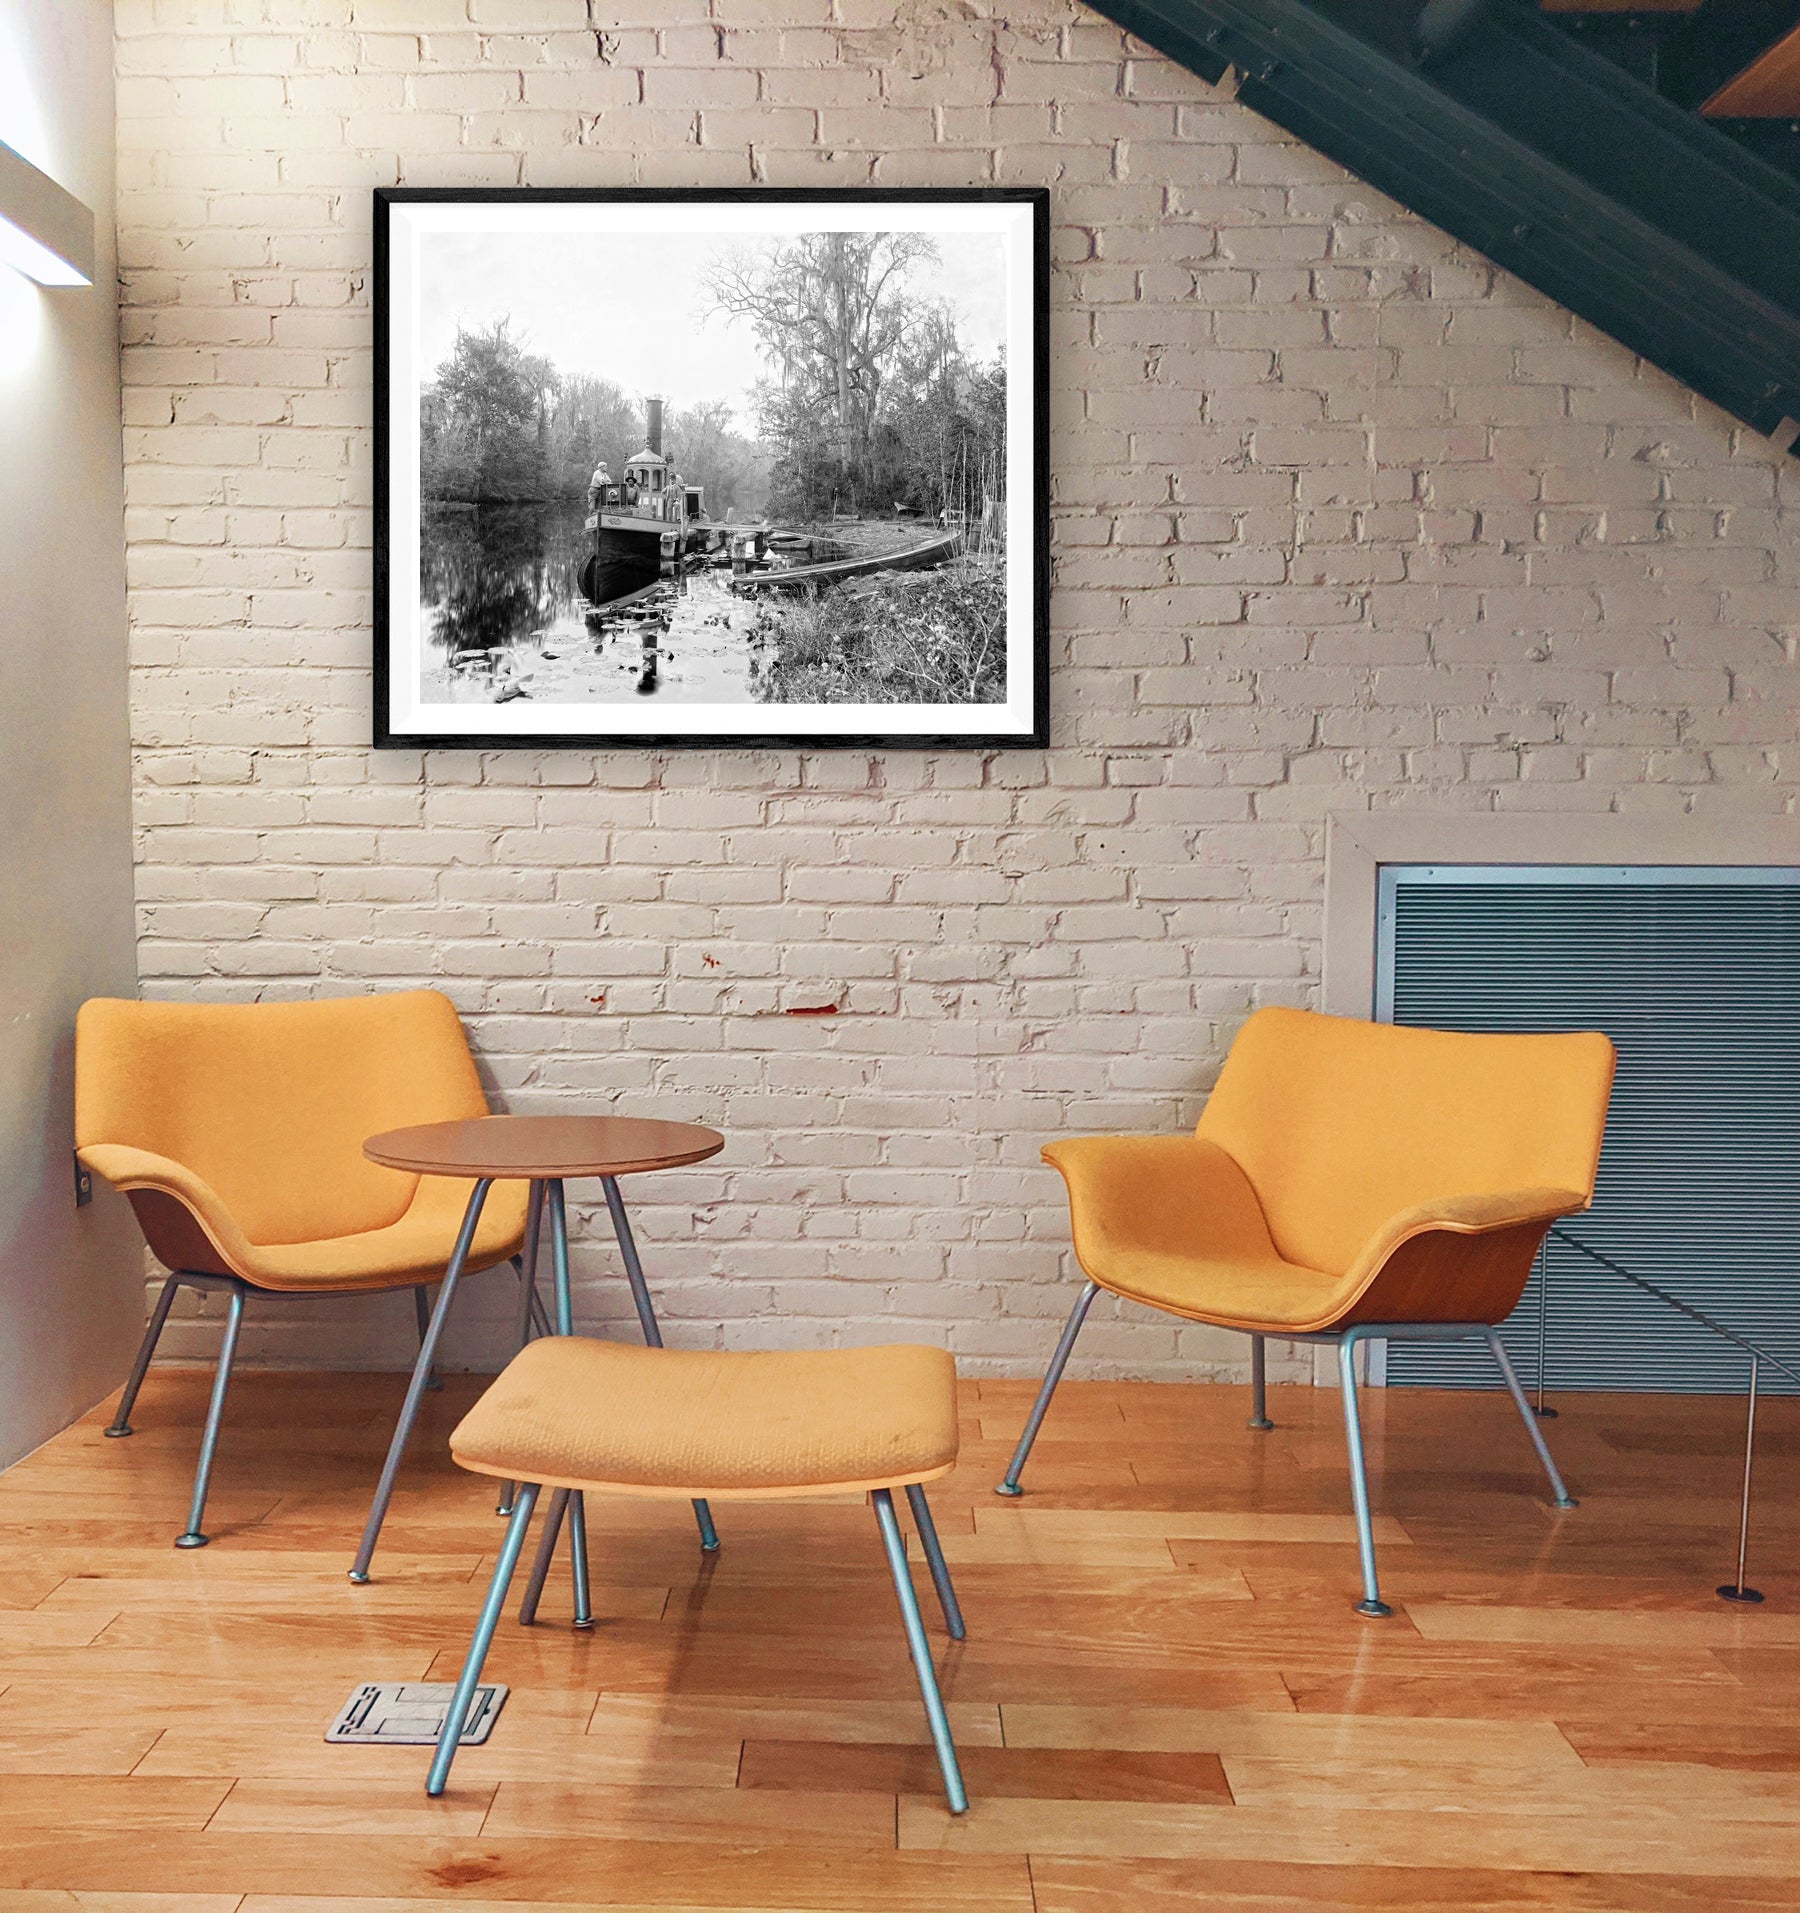 A framed print of a vintage image of Rice Creek hanging on a brick wall in a workspace